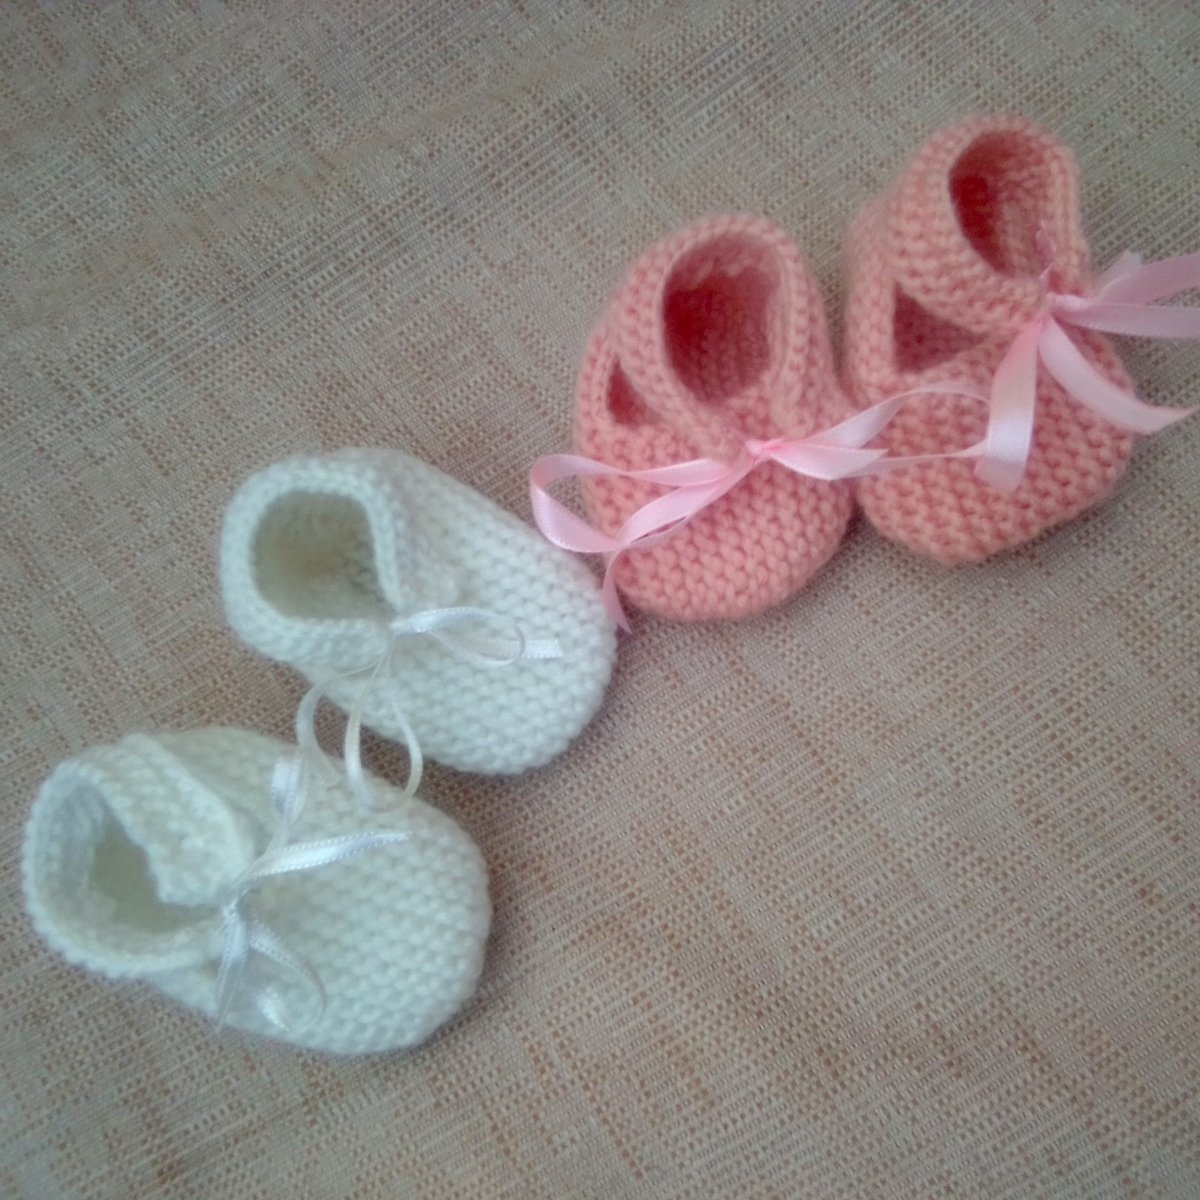 These cute little Hand Knitted Baby Shoes would make a lovely gift for a baby shower or a new baby. They cost £5 + P&P and can be made in any colour to fit a 0 - 3 month old baby. folksy.com/items/8298632-… #newonfolksy #creationsfortinytots #babyshoes #babyshowergift #newbabygift